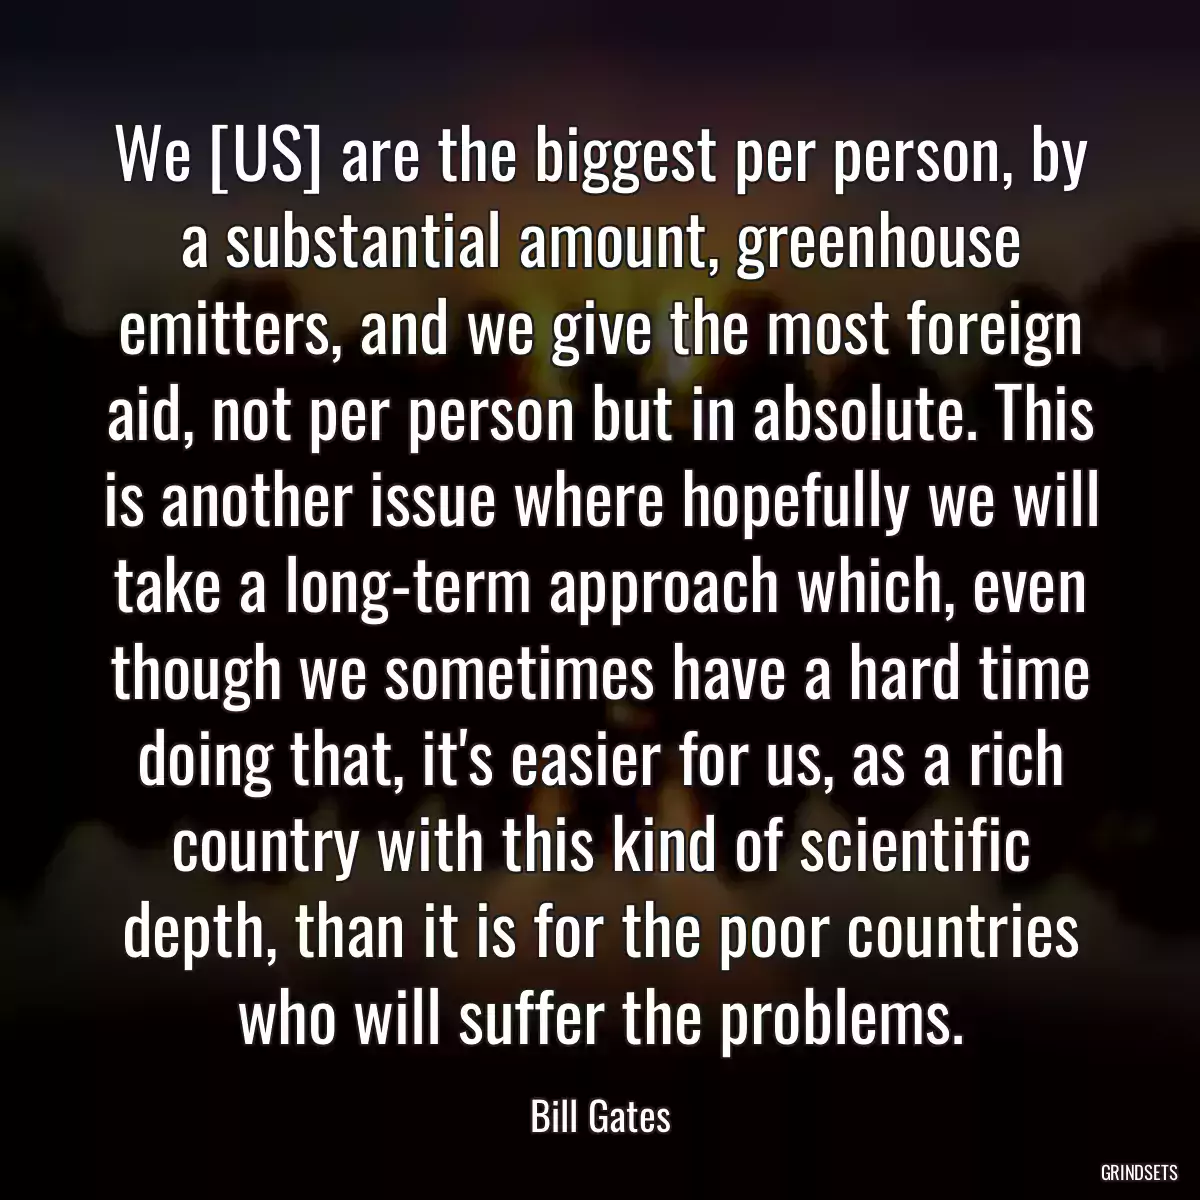 We [US] are the biggest per person, by a substantial amount, greenhouse emitters, and we give the most foreign aid, not per person but in absolute. This is another issue where hopefully we will take a long-term approach which, even though we sometimes have a hard time doing that, it\'s easier for us, as a rich country with this kind of scientific depth, than it is for the poor countries who will suffer the problems.